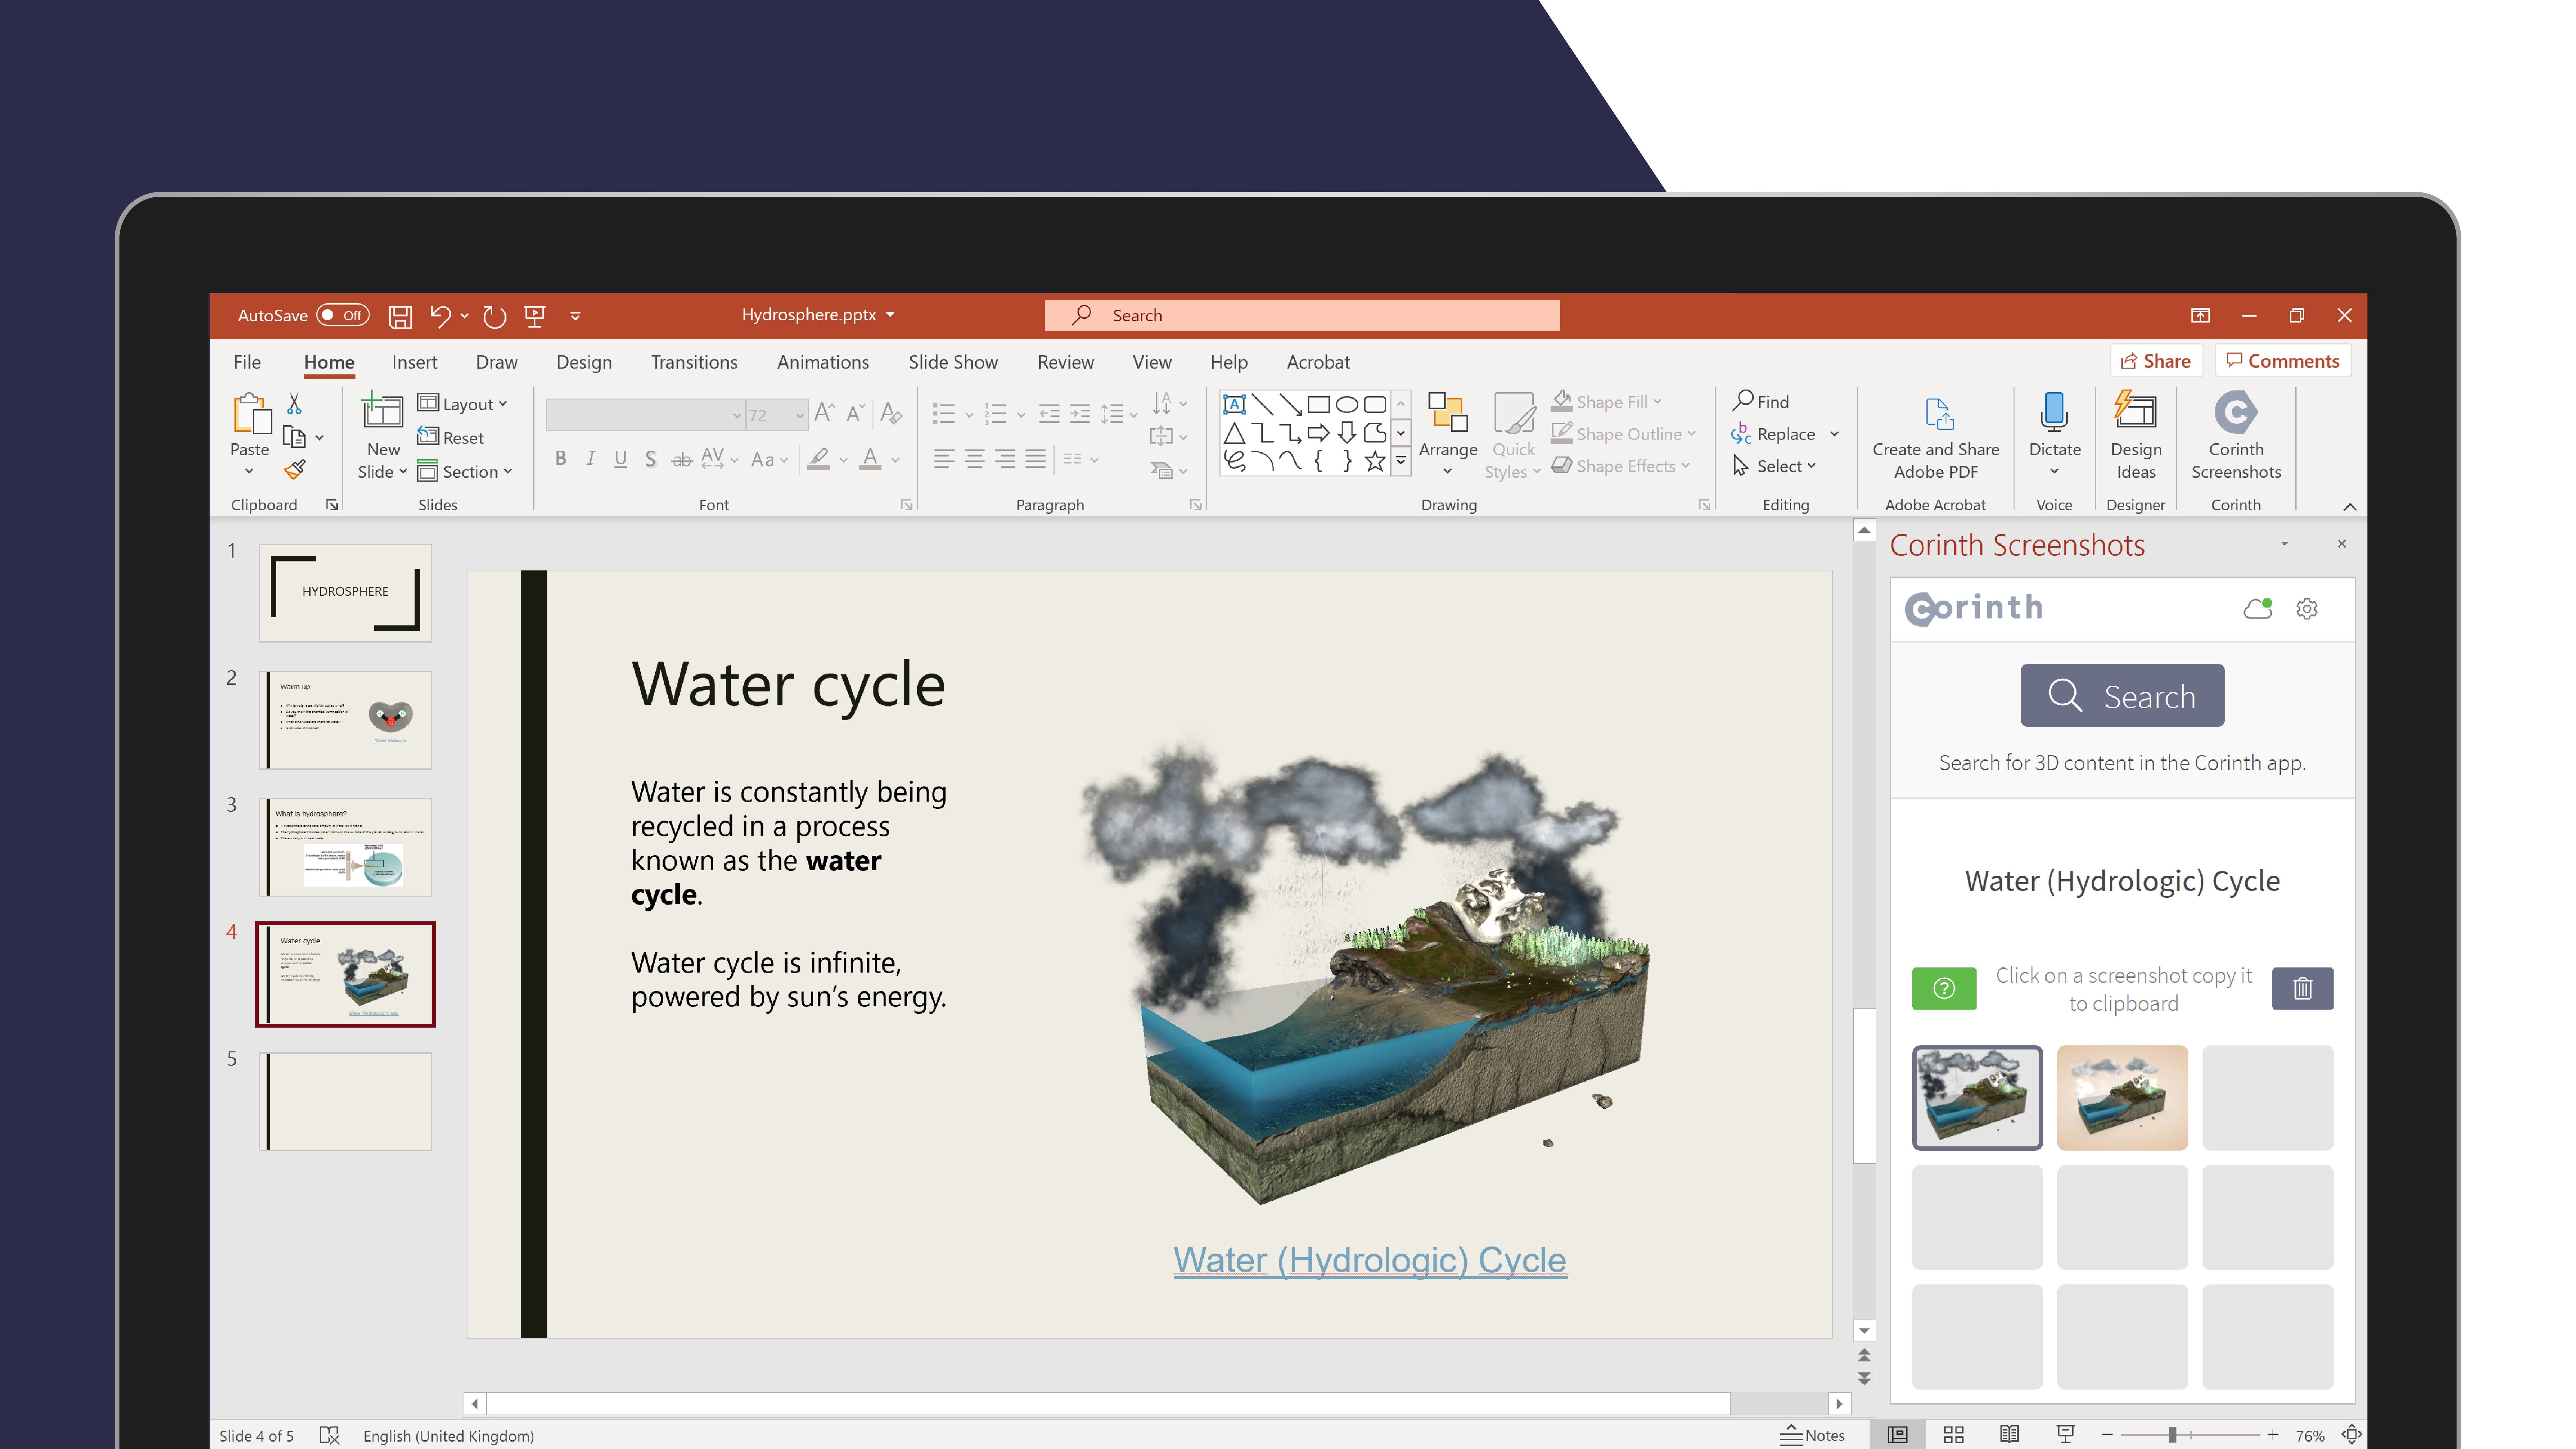 Sync Corinth with Office and refine your presentations and other teaching materials with interactive 3D models.